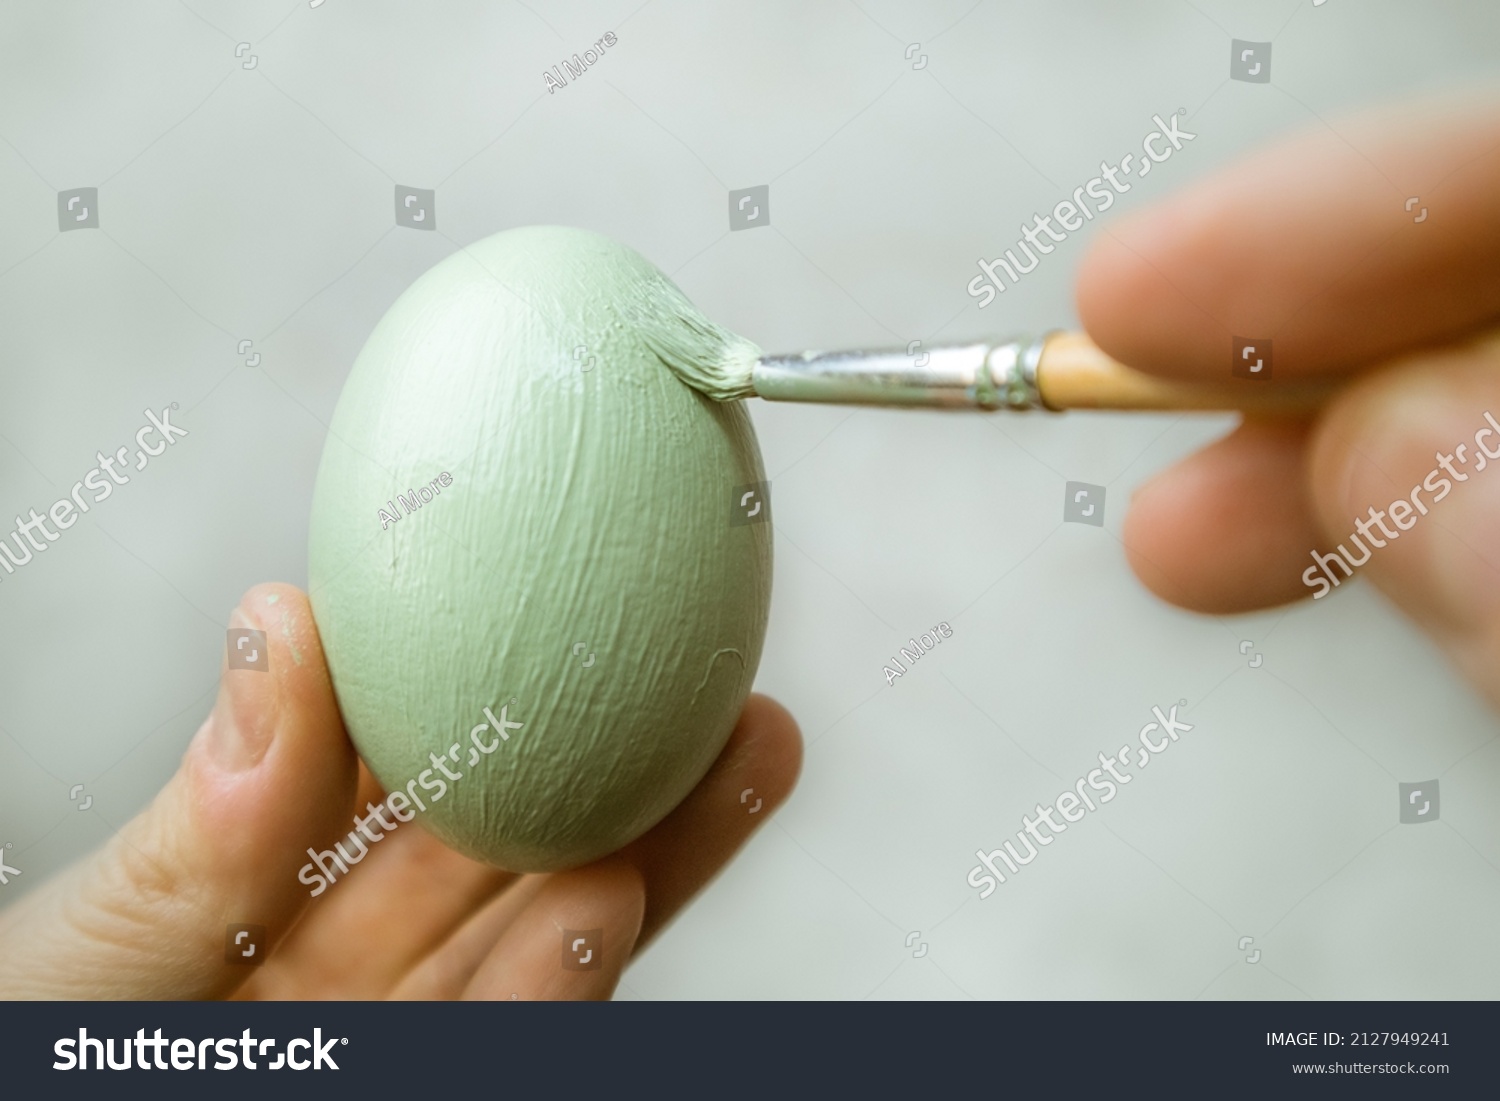 Hand holds brash and paints egg. A process of painting an Easter egg with light green paint. Paint brush in woman's hand on gray background. Tradition and people concept. Spring season, April holiday. #2127949241